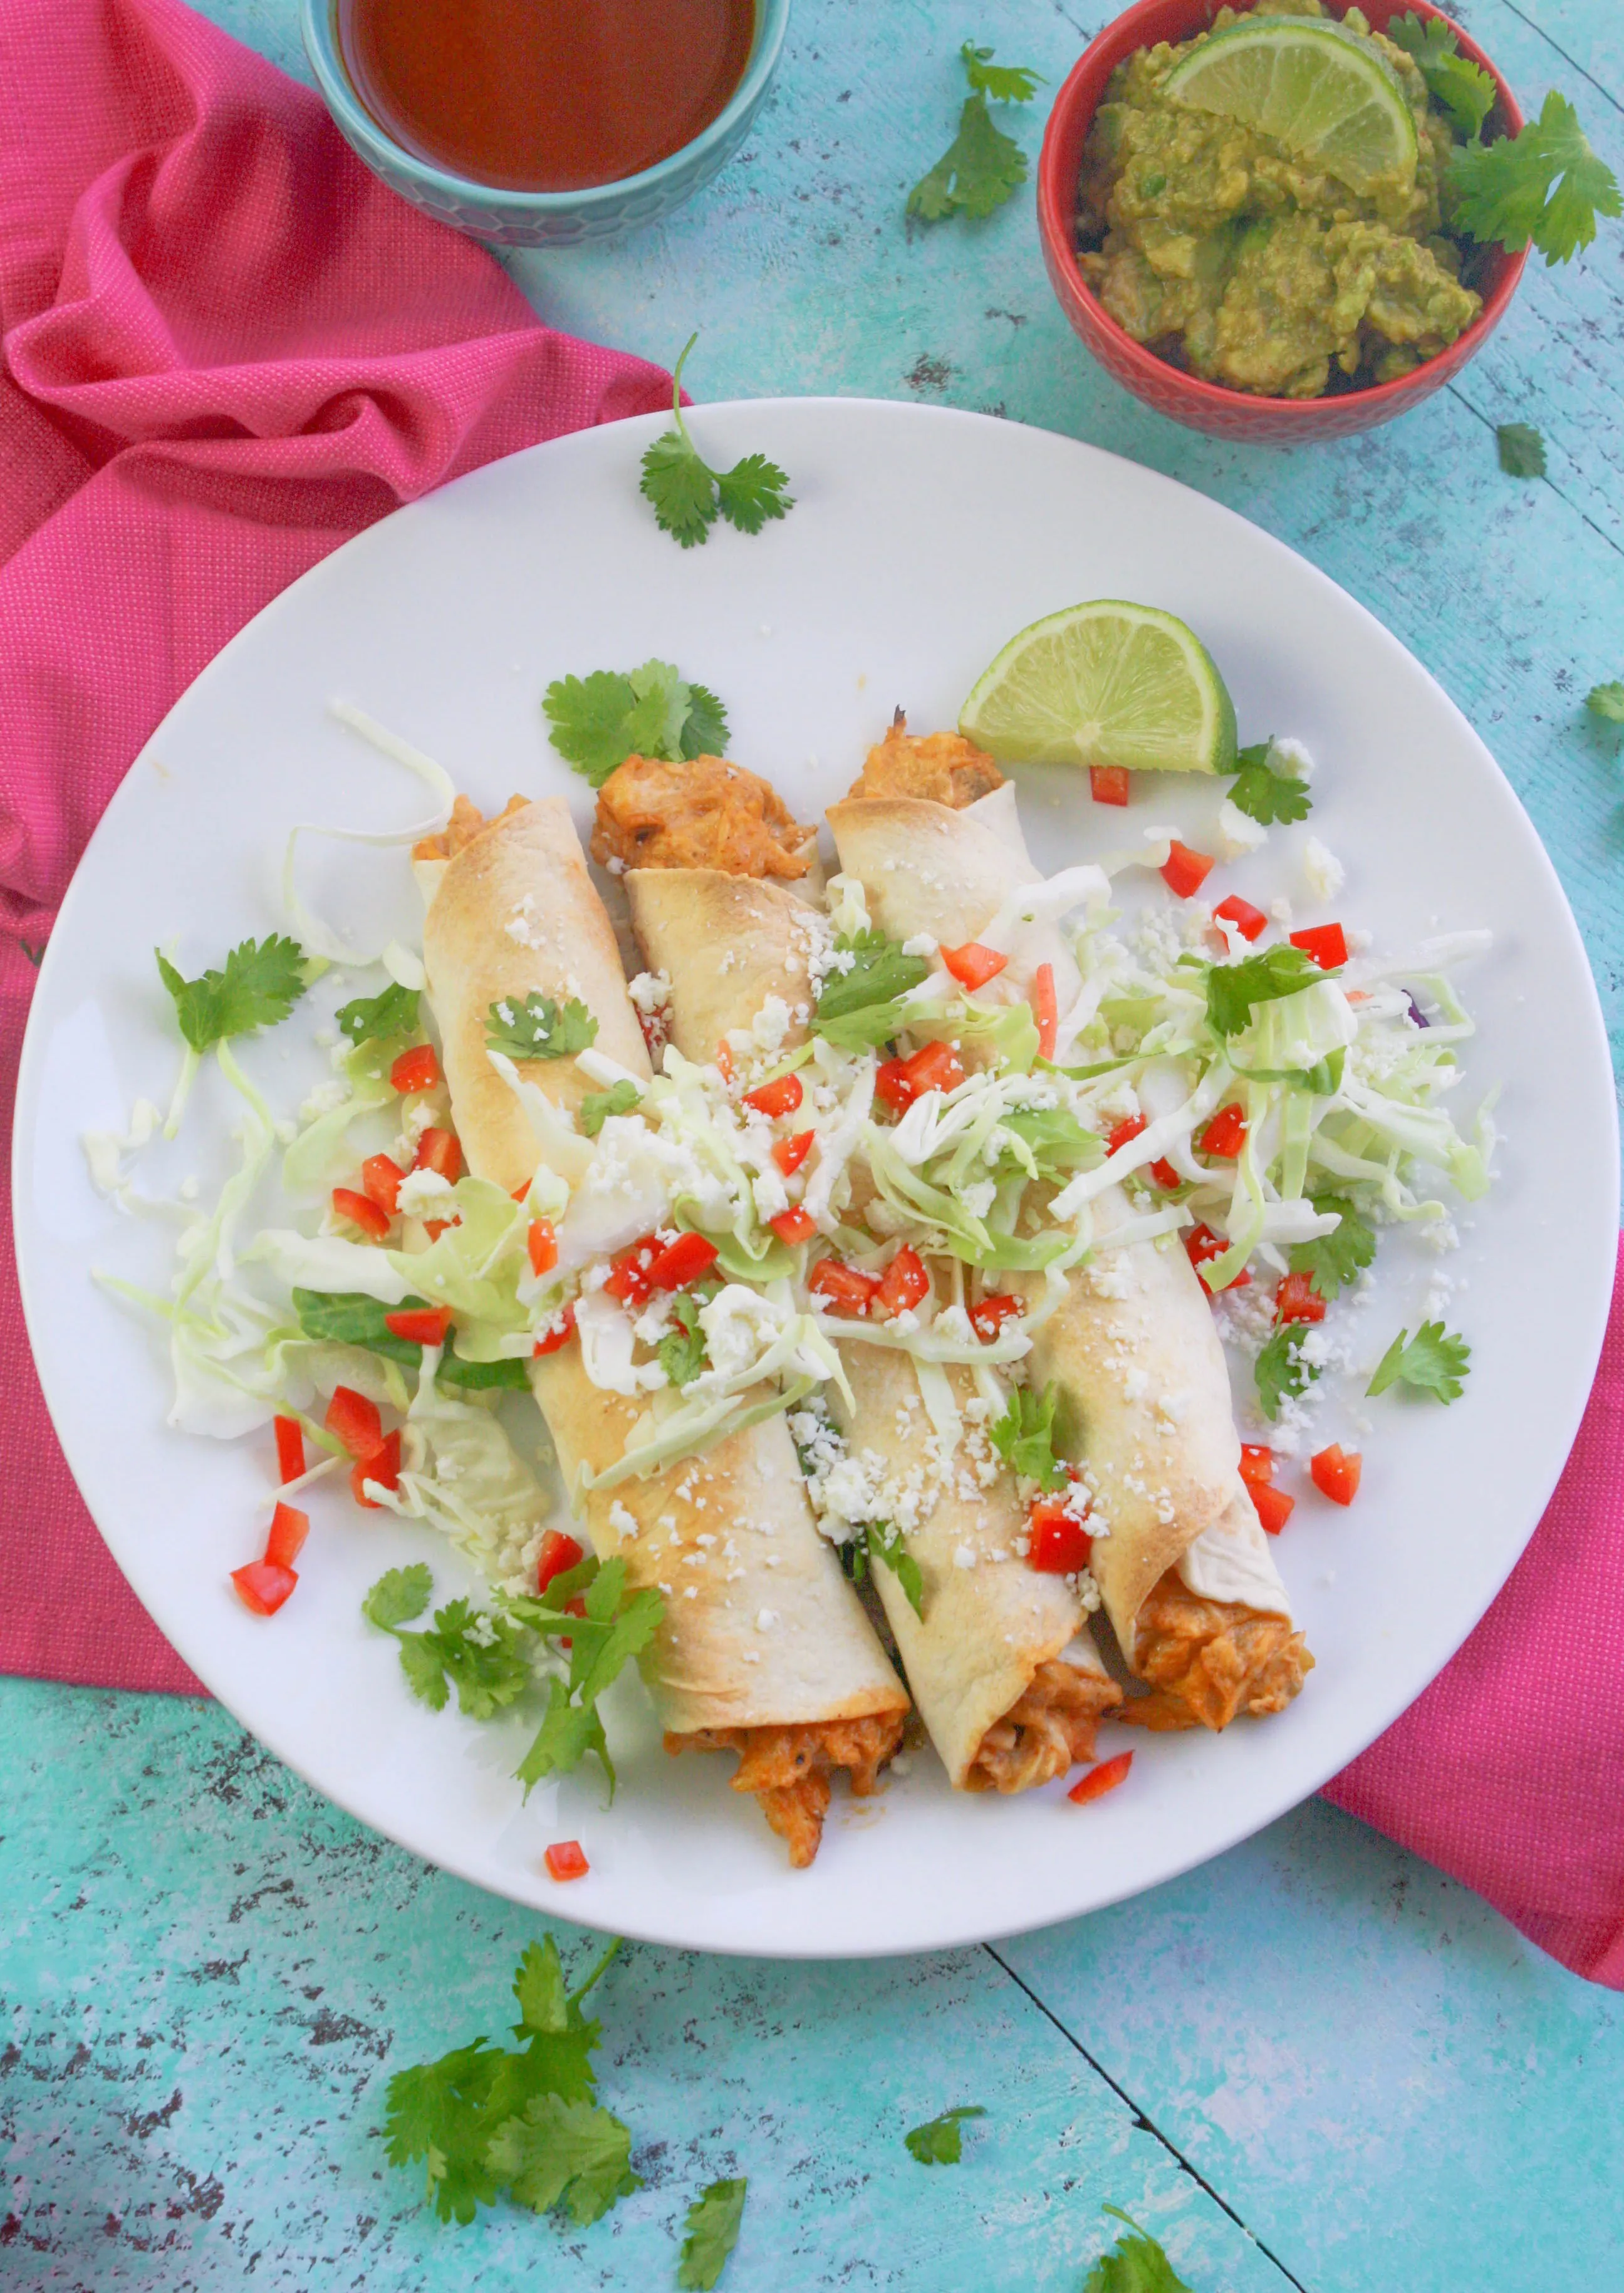 Baked Chicken and Green Chile Taquitos are easy to make for a favorite snack. Baked Chicken and Green Chile Taquitos are a Mexican-inspired favorite dish!